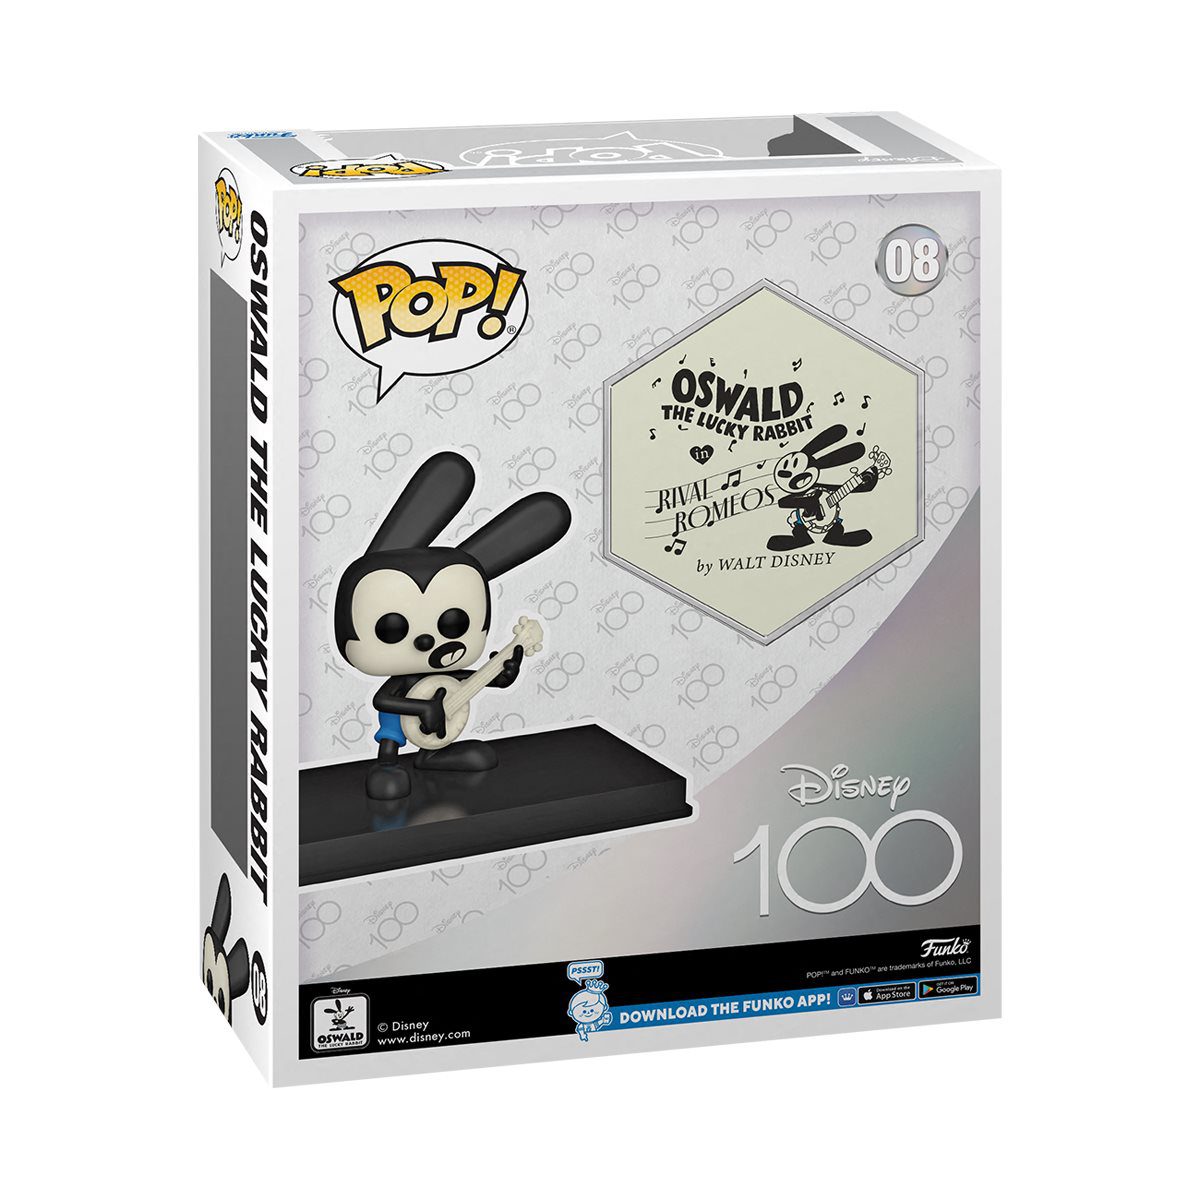 Disney 100 Oswald the Lucky Rabbit Pop! Art Cover Figure with Case